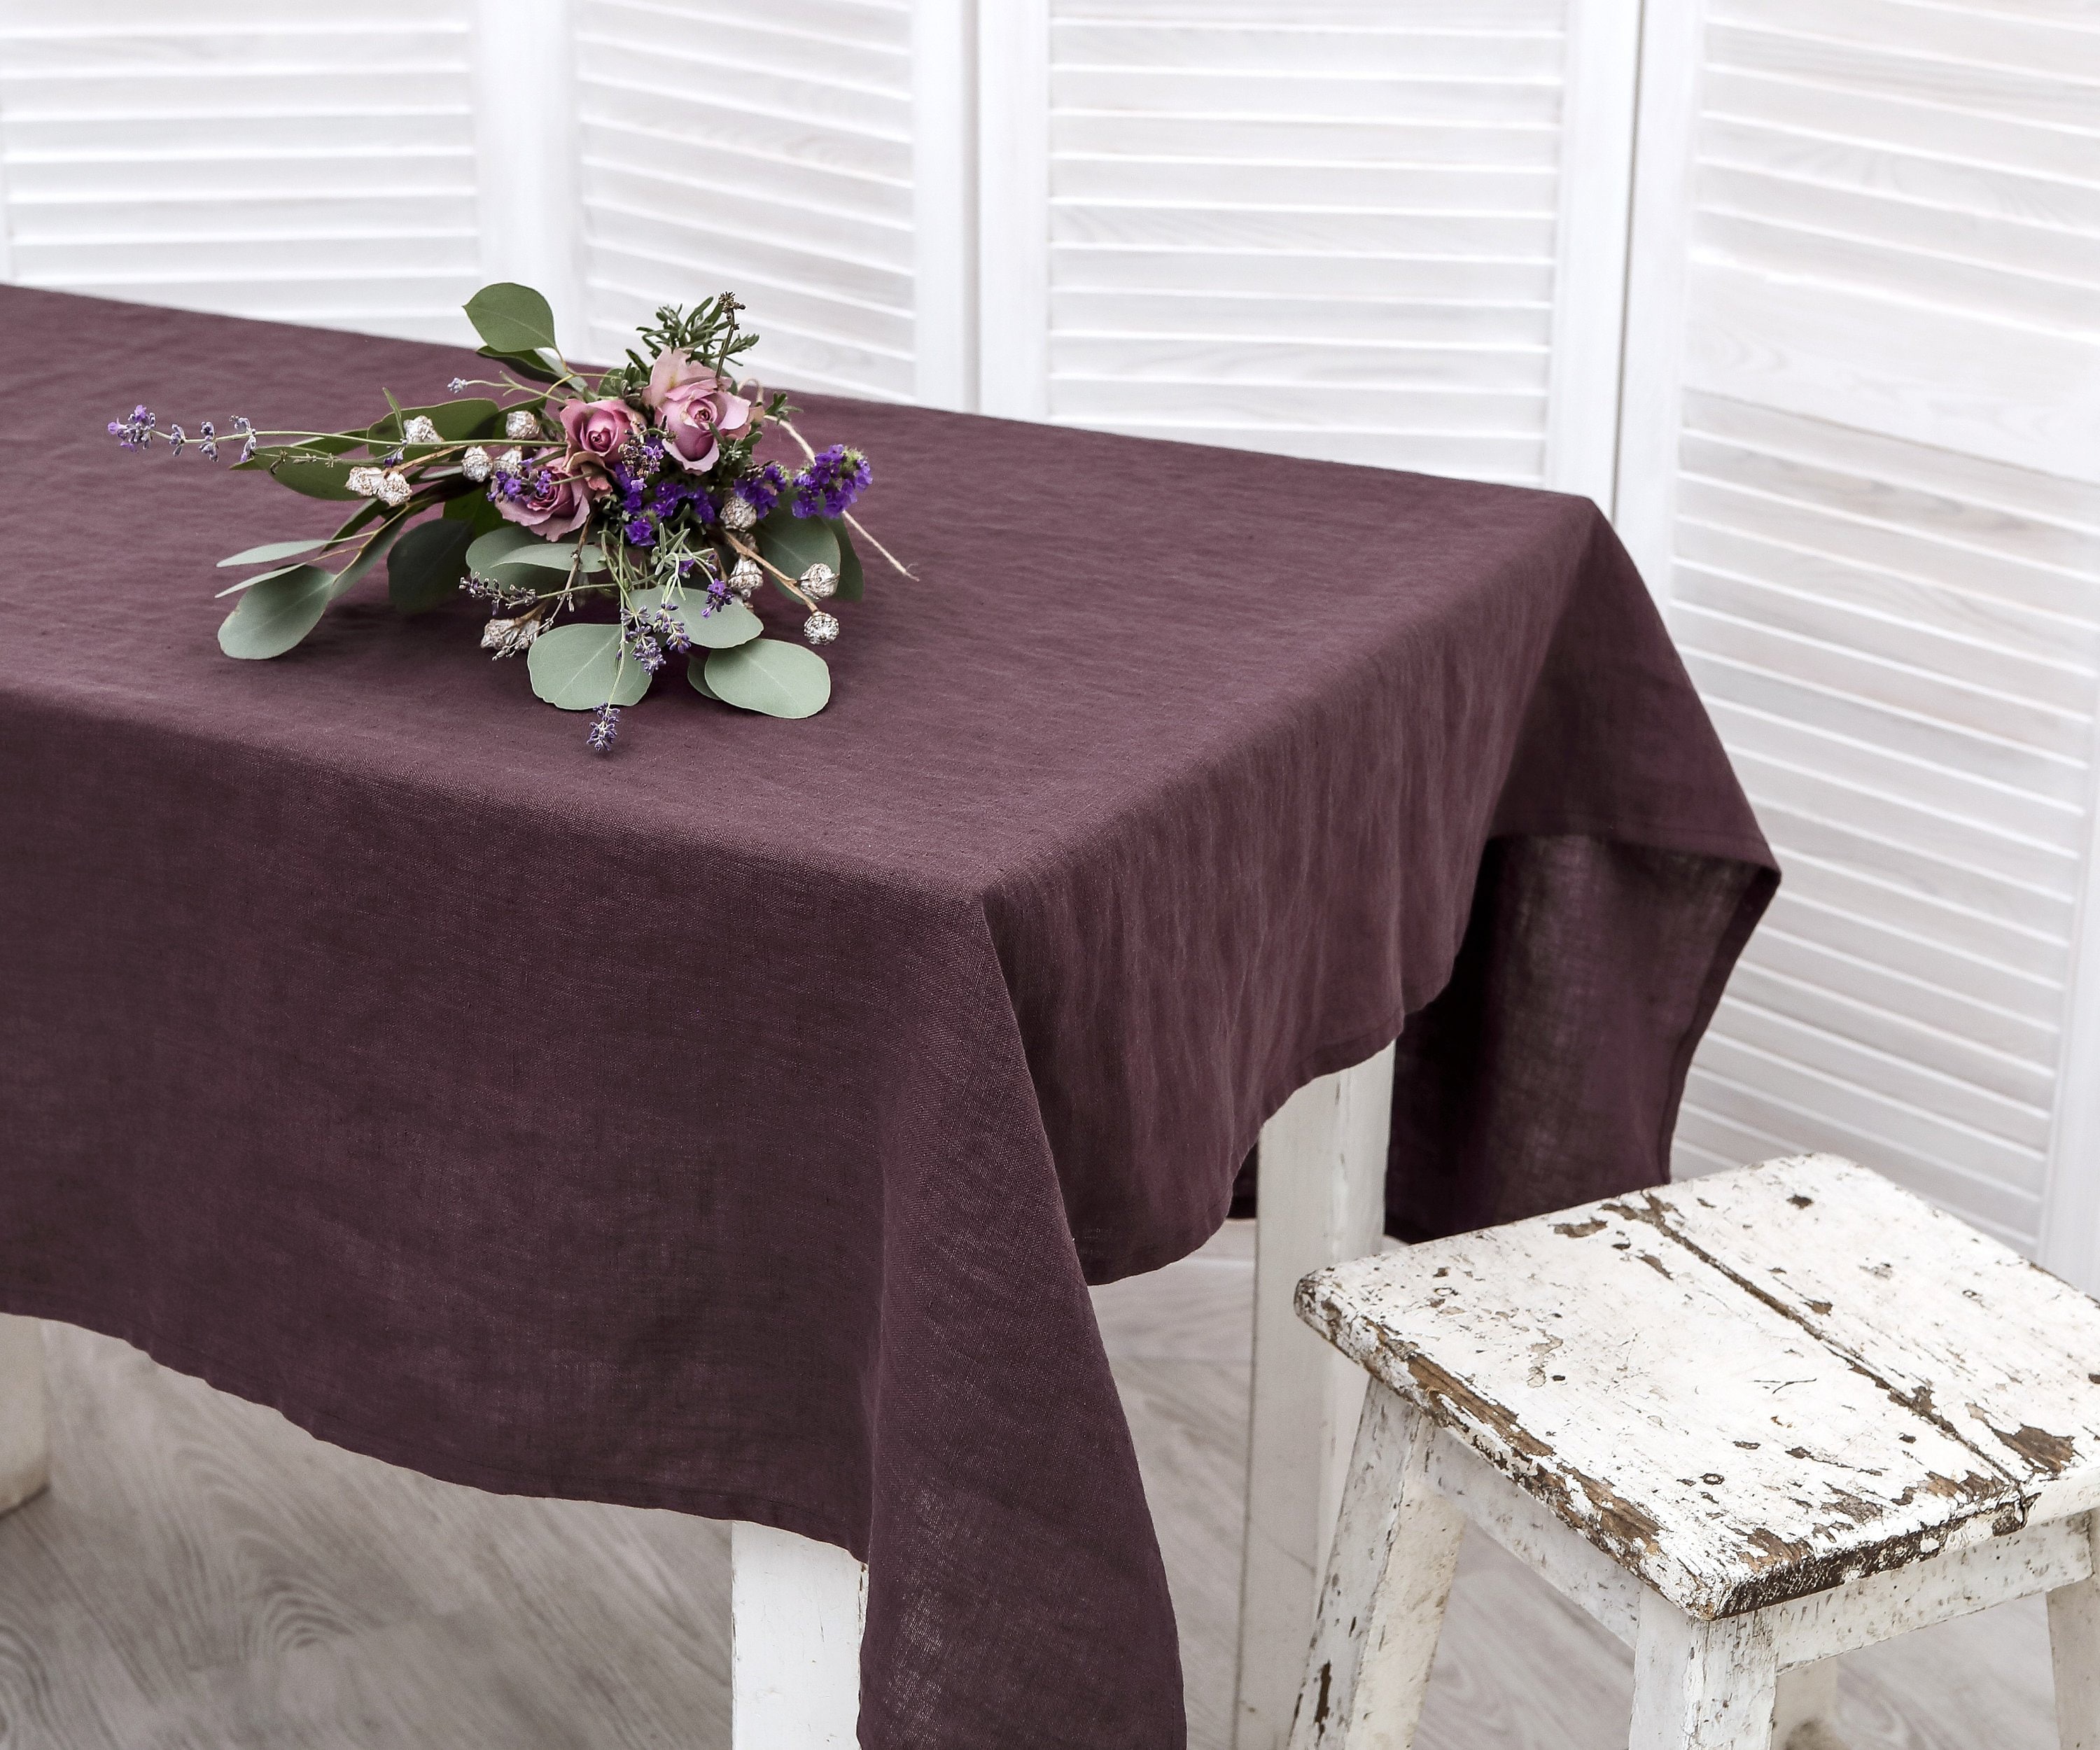 Linen tablecloth. Washed linen tablecloth. Table cloth in plum color ...